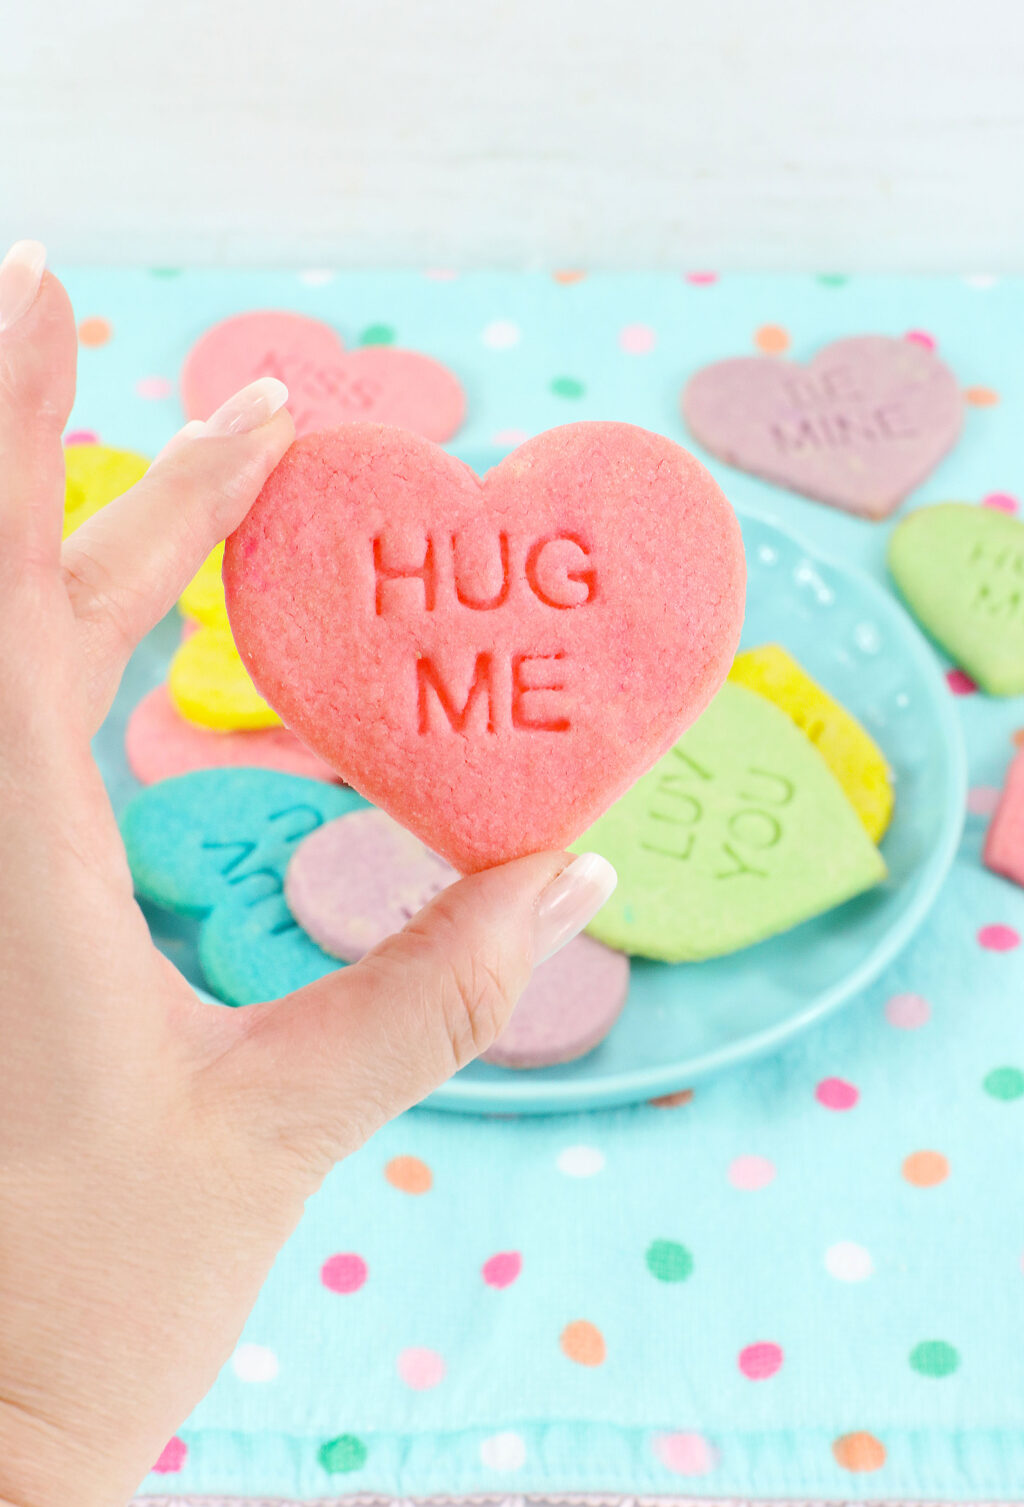 woman's hand holding a conversation heart cookie that says hug me